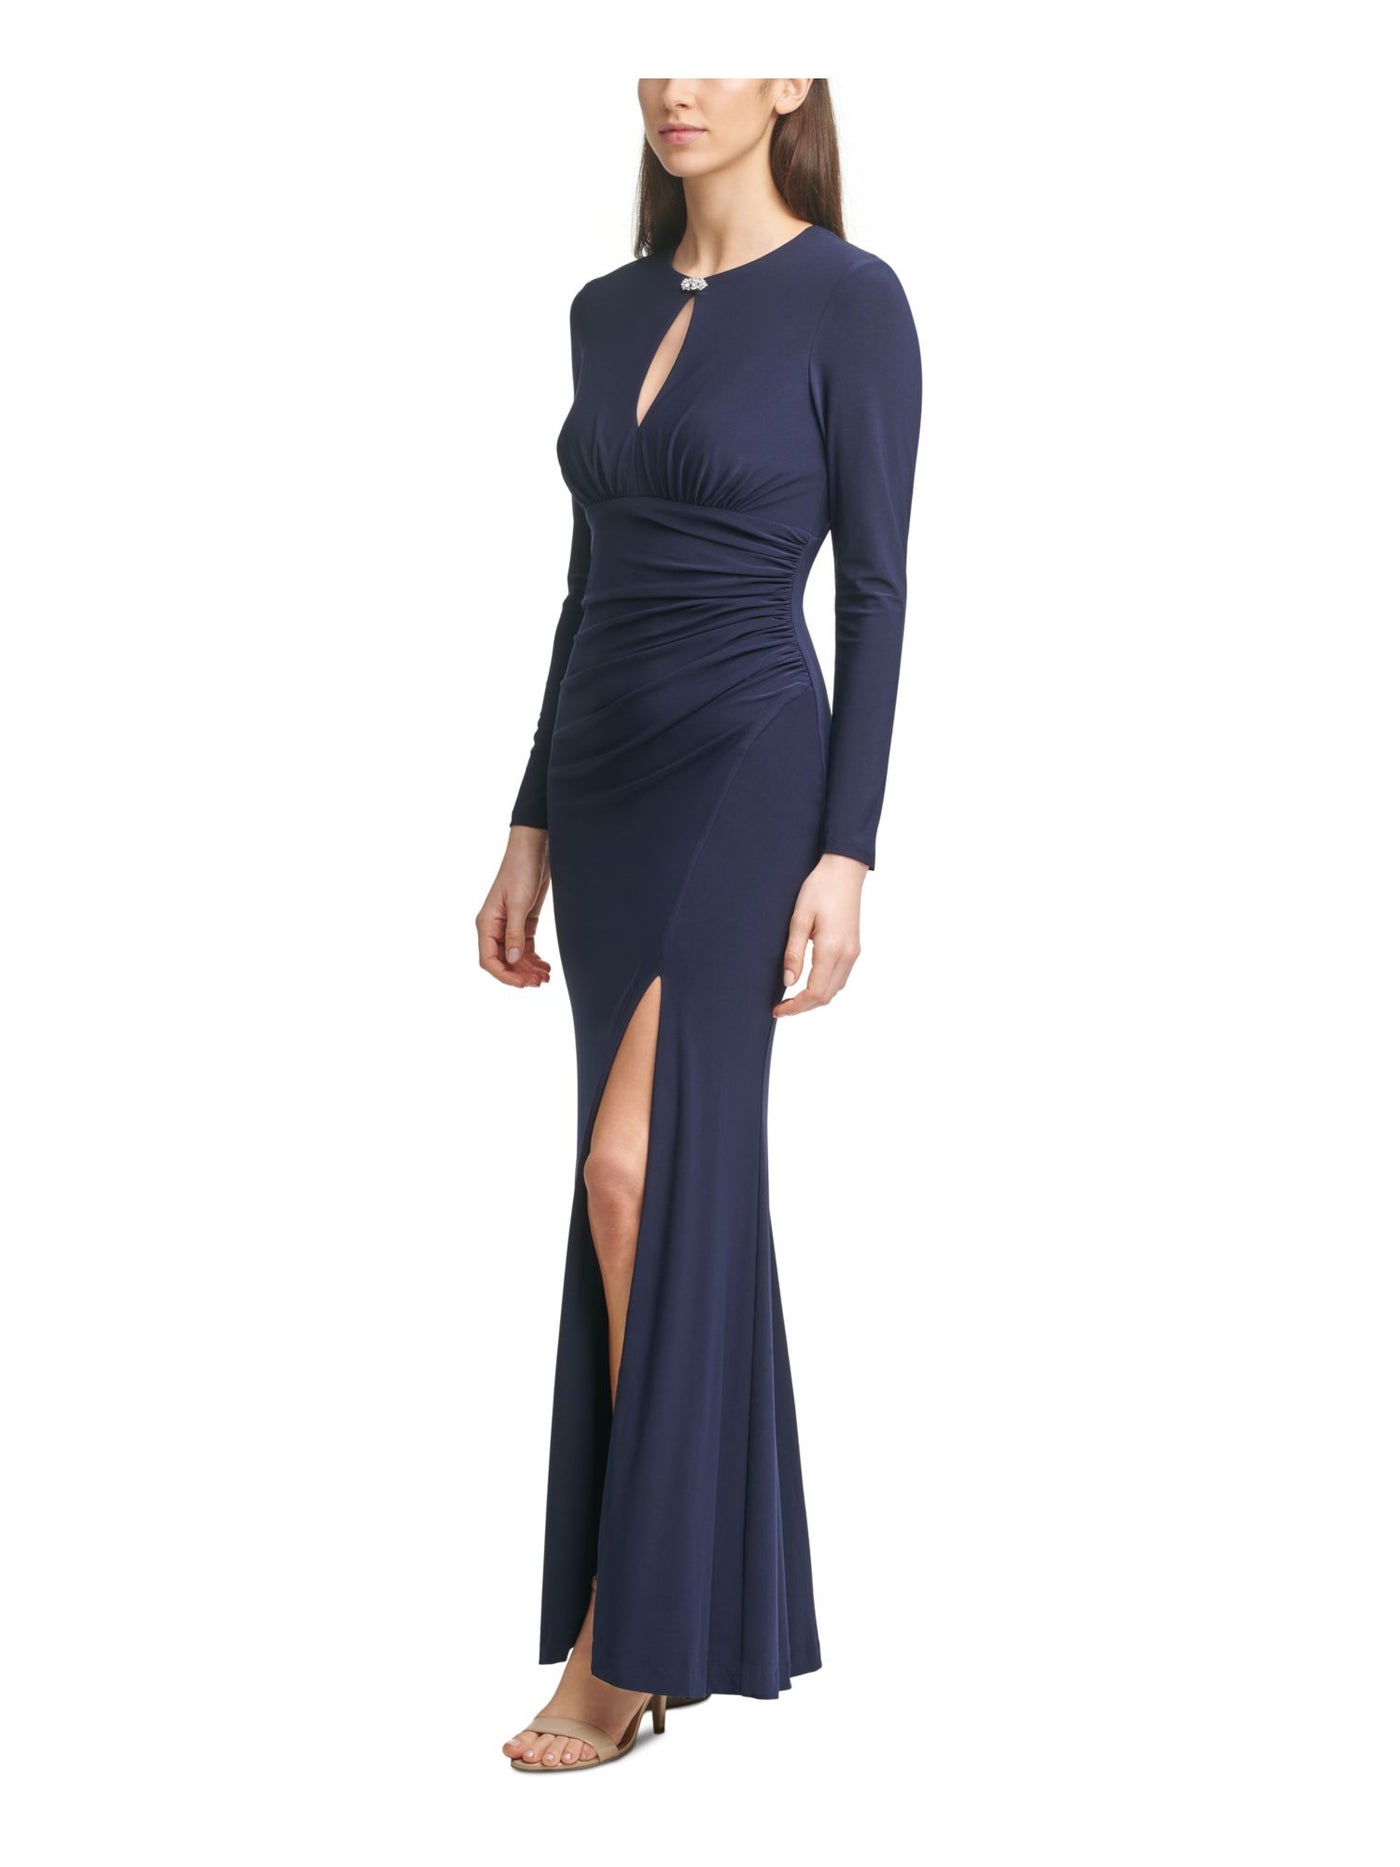 VINCE CAMUTO Womens Navy Stretch Embellished Zippered Slitted Ruched Long Sleeve Keyhole Full-Length Formal Gown Dress 4